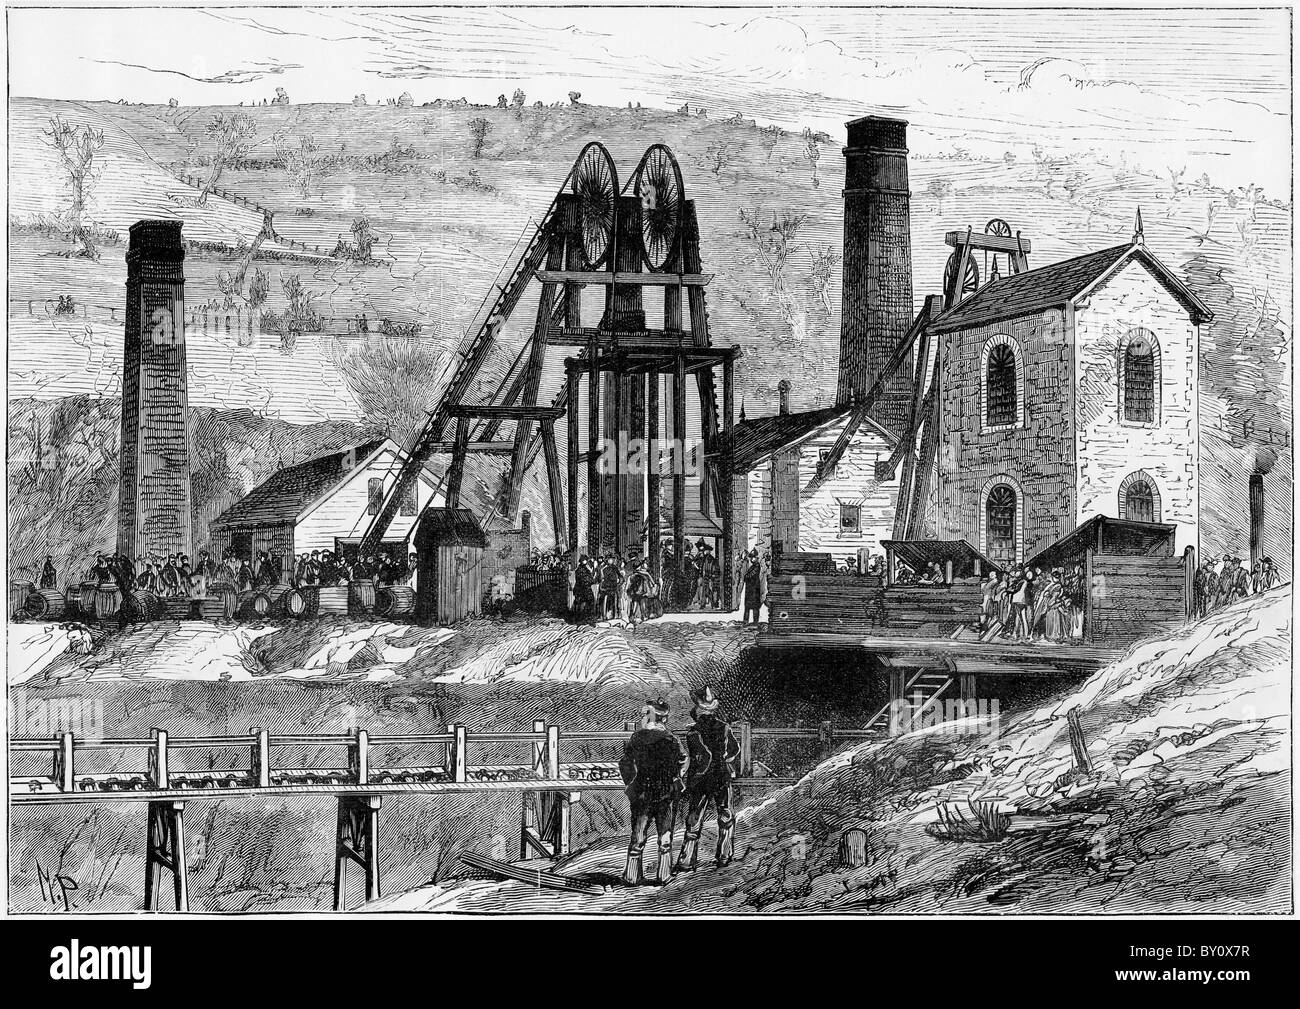 View of Llanerch Colliery where 176 men were killed in explosion engraving dated 15th Feb 1890 near Pontypool South Wales UK Stock Photo